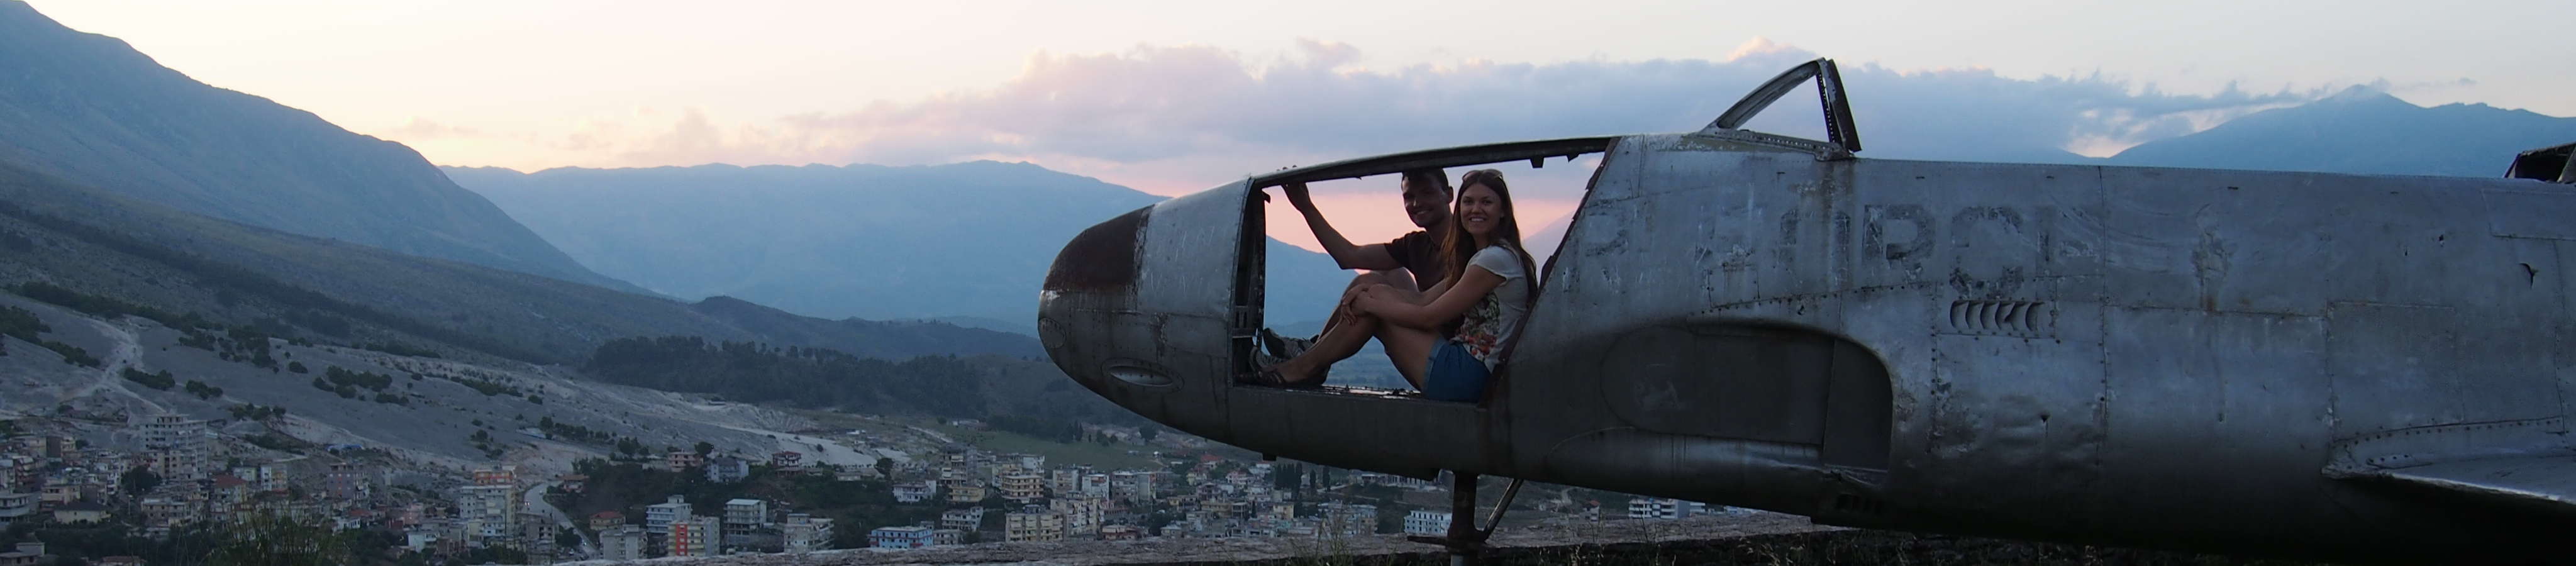 A photo of me and my wife on a wrecked US airplane in Gjirokastër Fortress